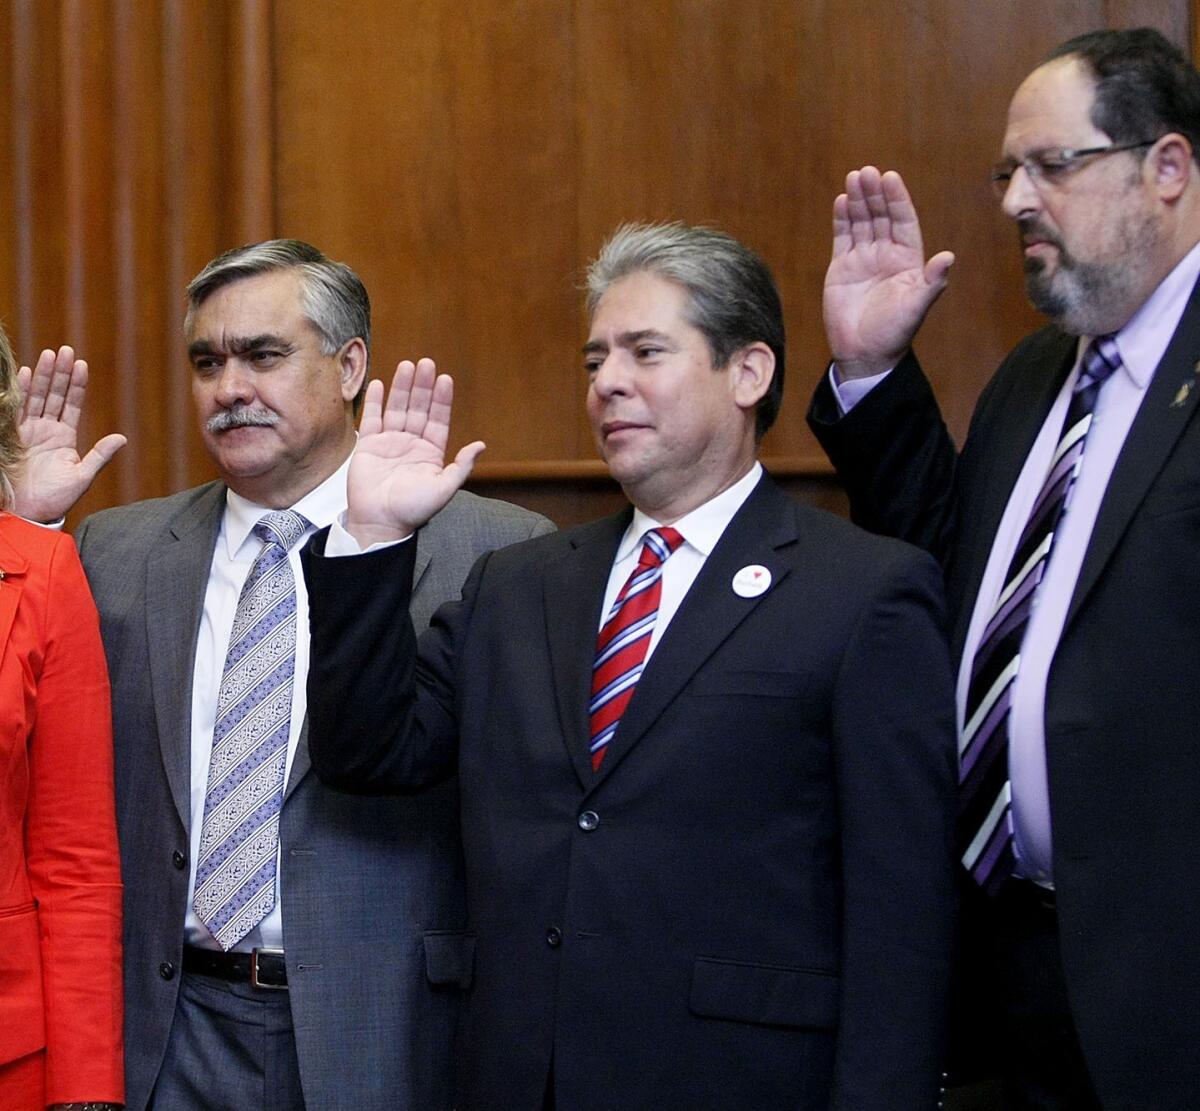 From left, Burbank City Council members Jess Talamantes, Bob Frutos and David Gordon are sworn into office, in this file photo taken on Wednesday, May 1, 2013. The trio are running for reelection and are facing five challengers.